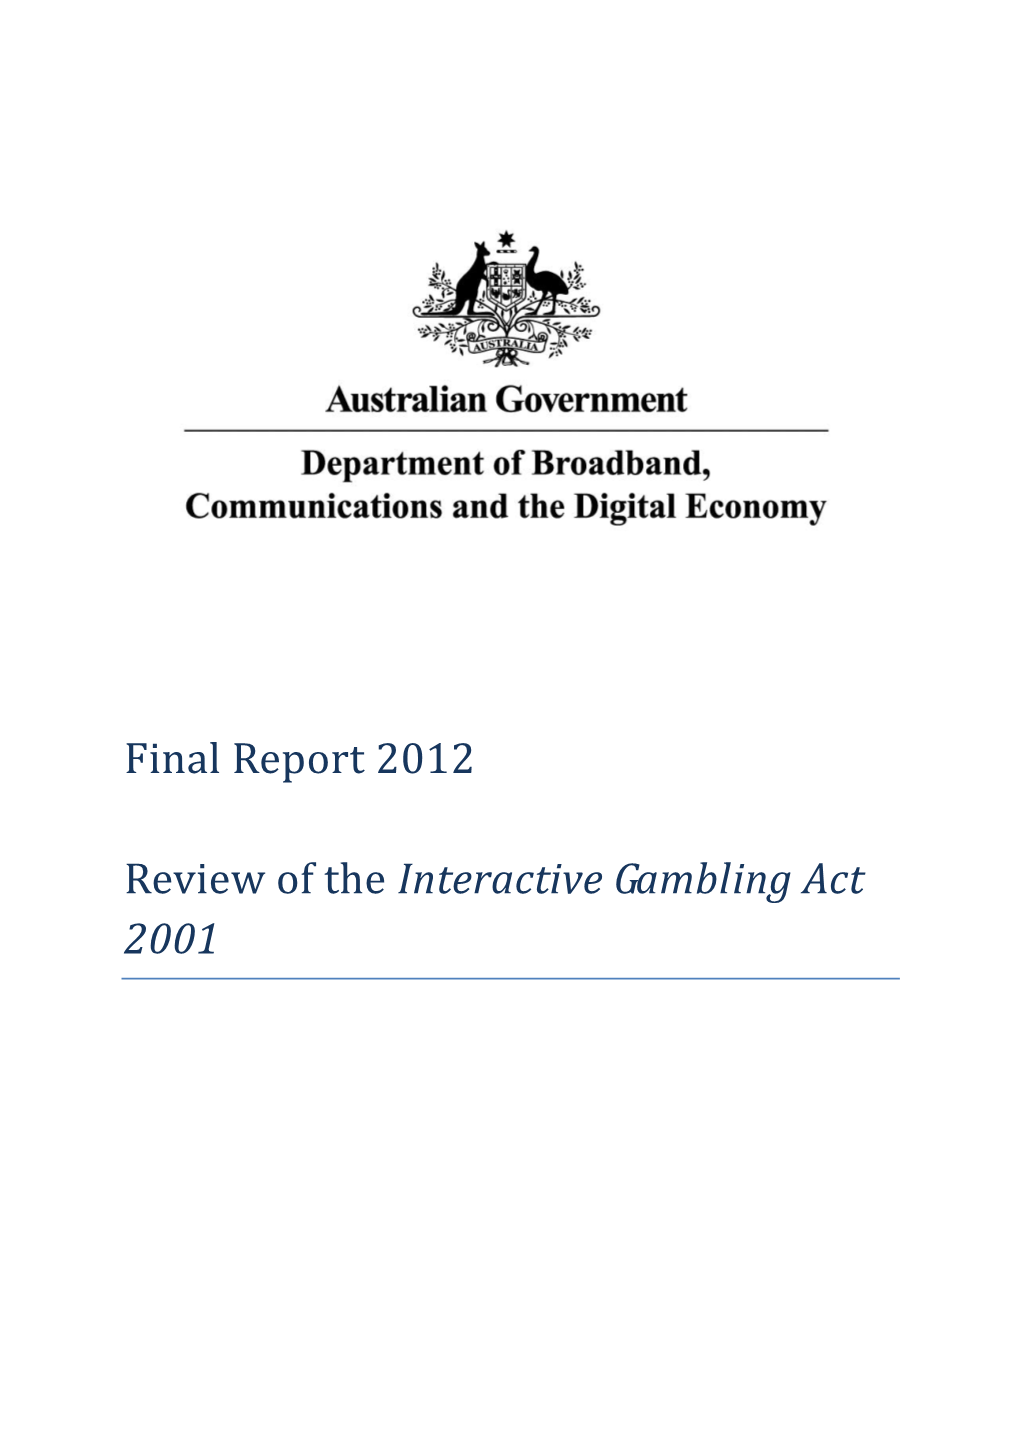 Final Report 2012 Review of the Interactive Gambling Act 2001